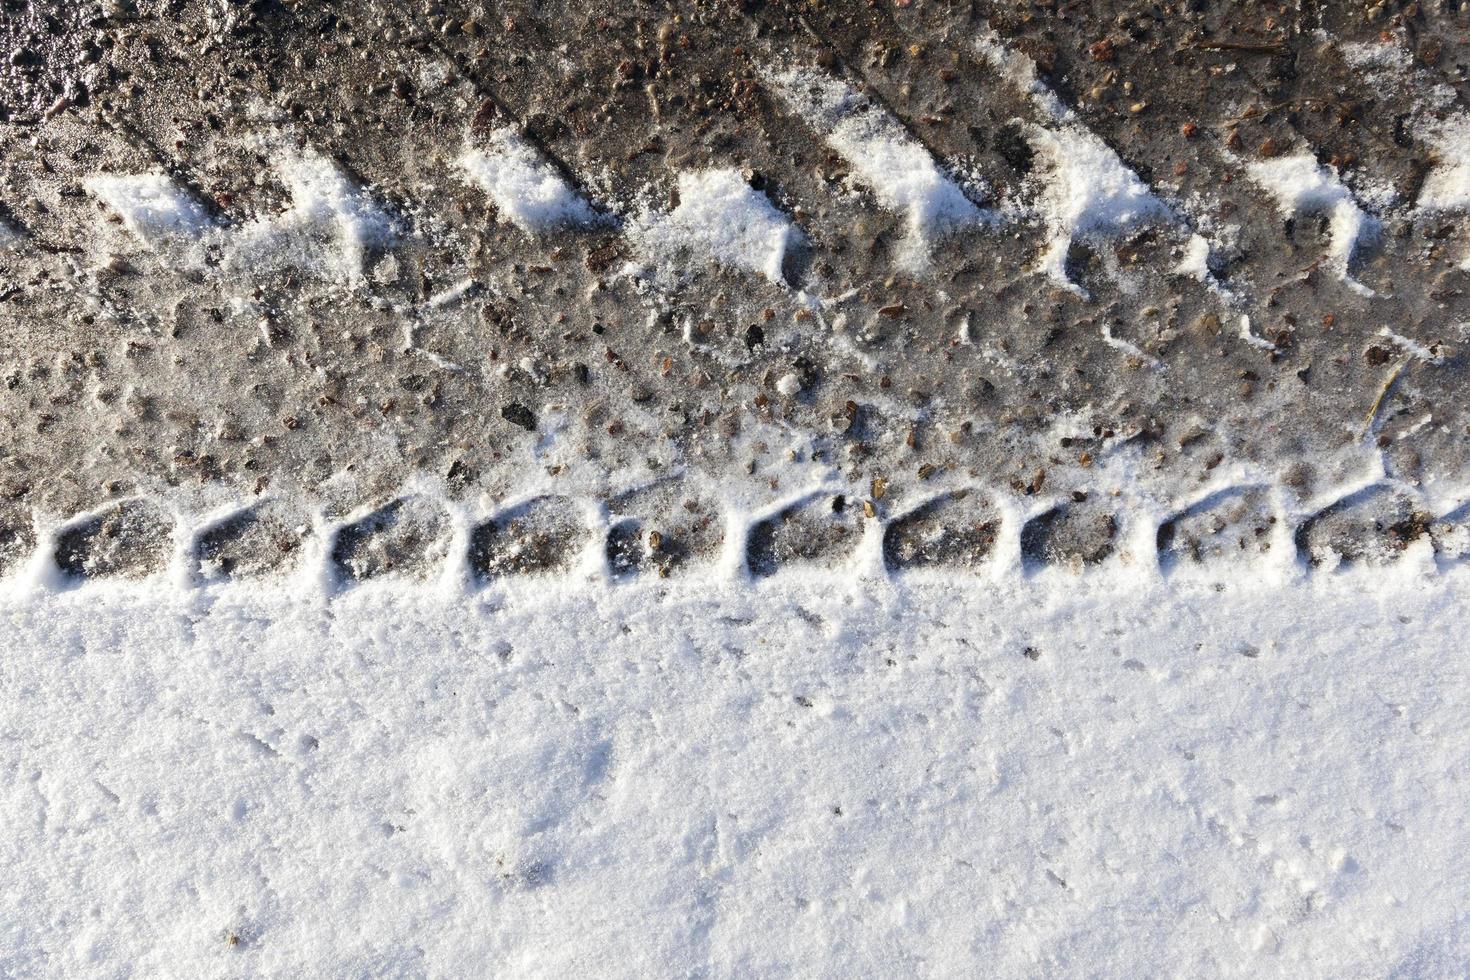 A track in the snow, winter photo